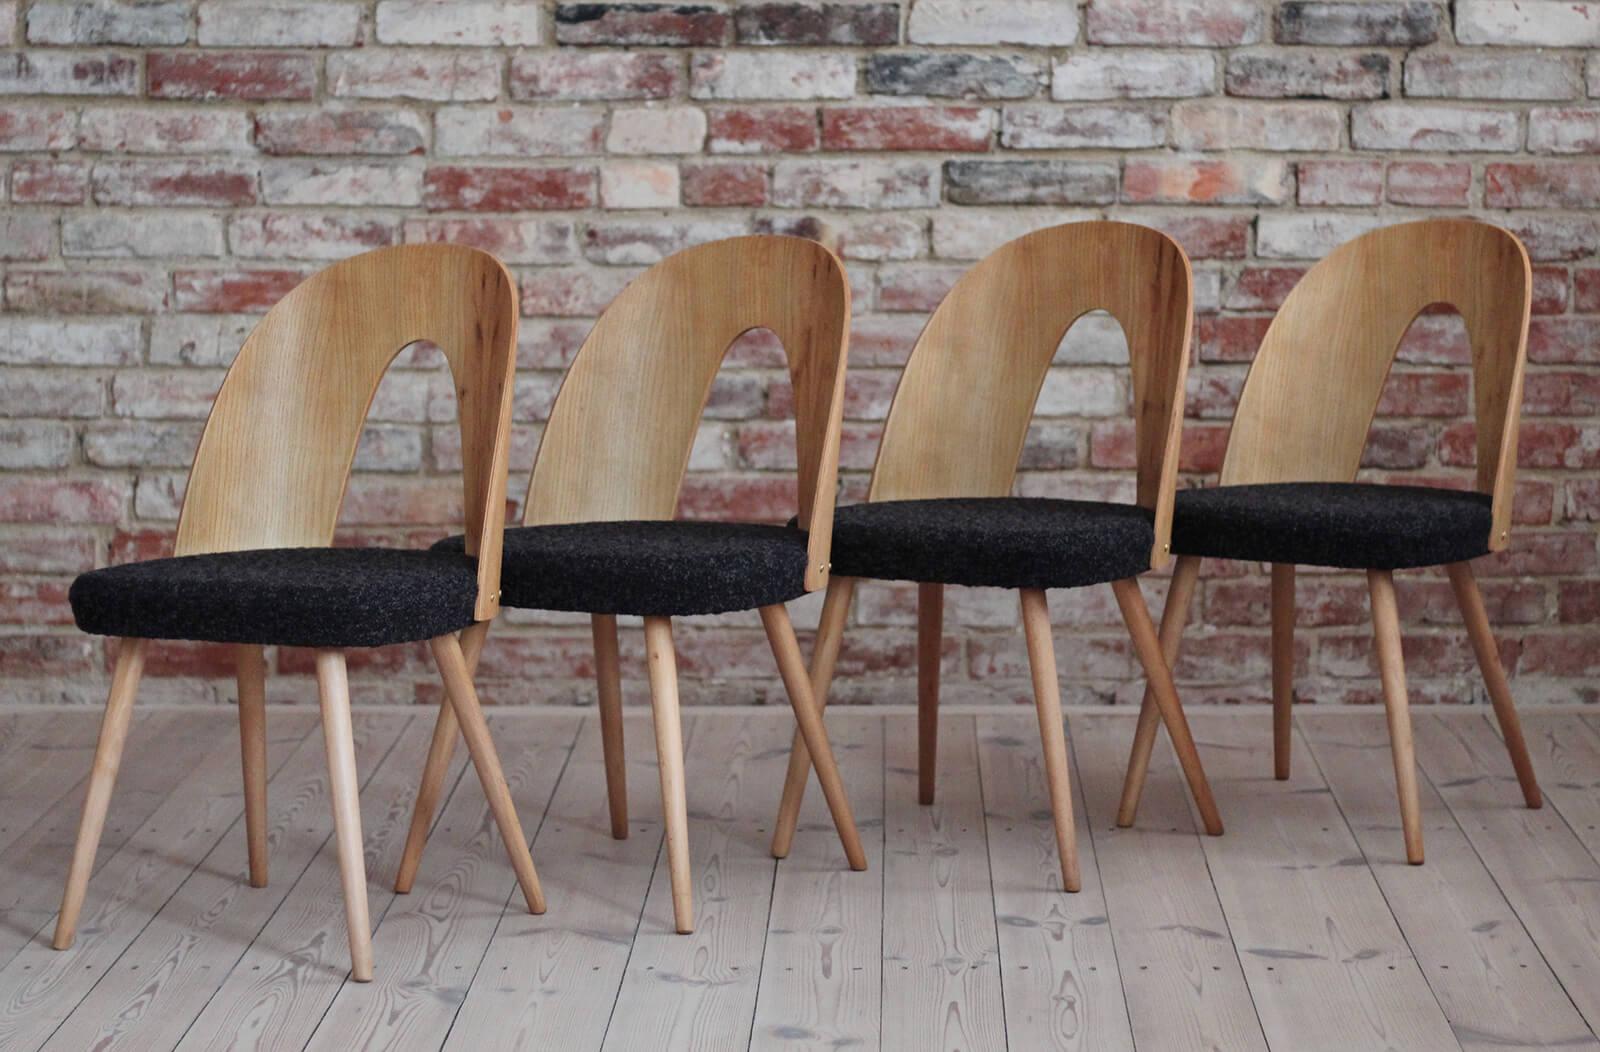 This set of four vintage dining chairs was designed by Czech designer Antonin Šuman in the 1960s. The chairs have been completely restored finished with high-quality wood oil that gave them beautiful finish and refreshed look. The set is